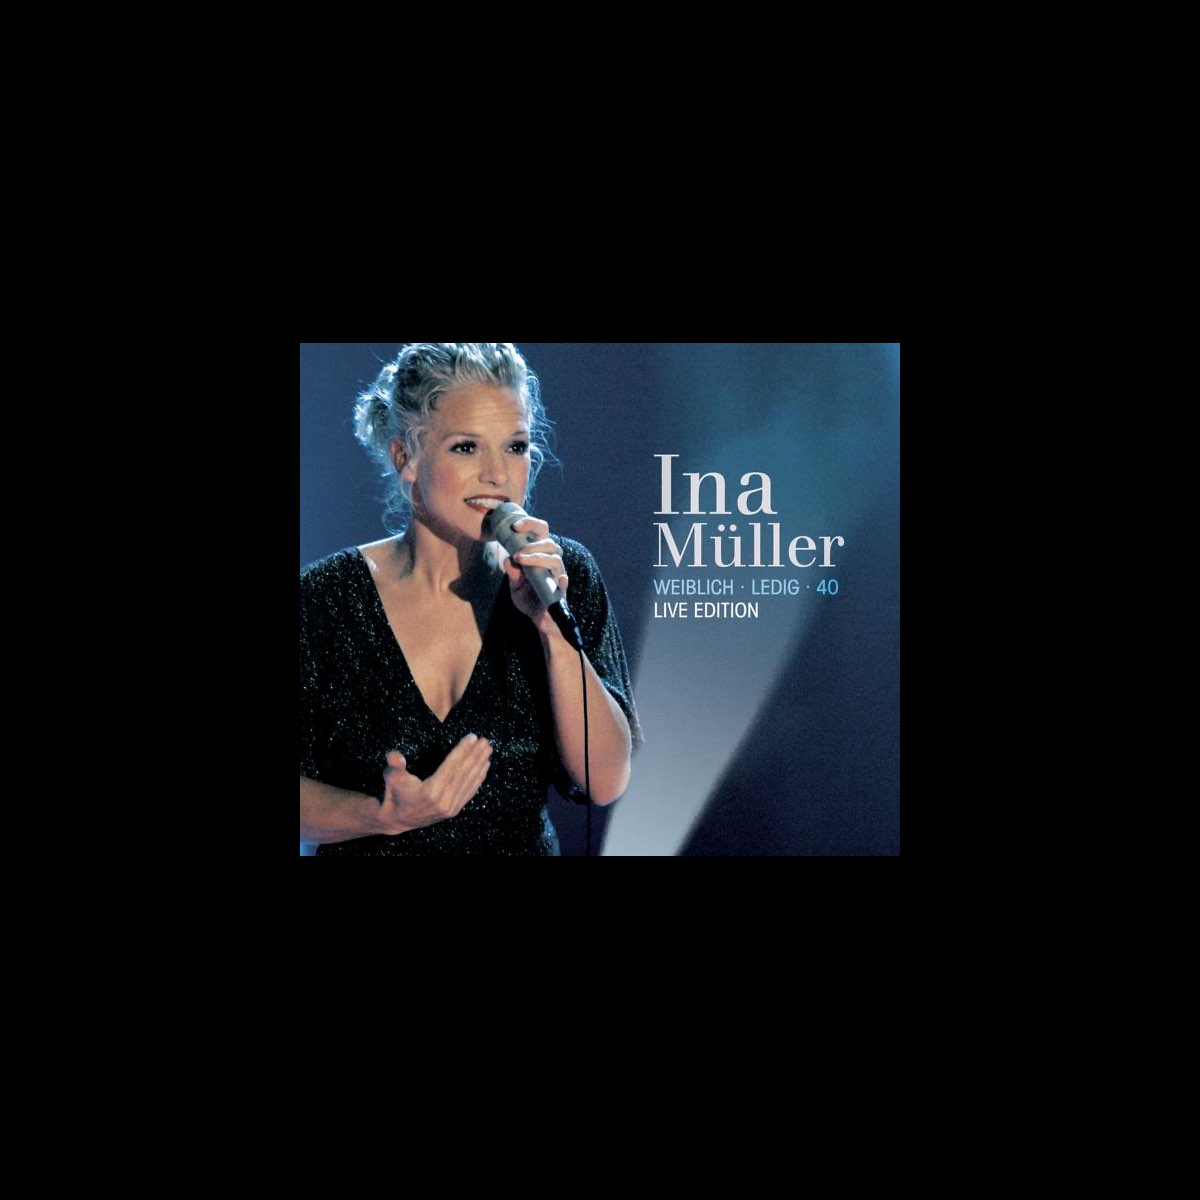 Weiblich. Ledig. 40. (Live Edition) [Audio Version] by Ina Müller on Apple  Music